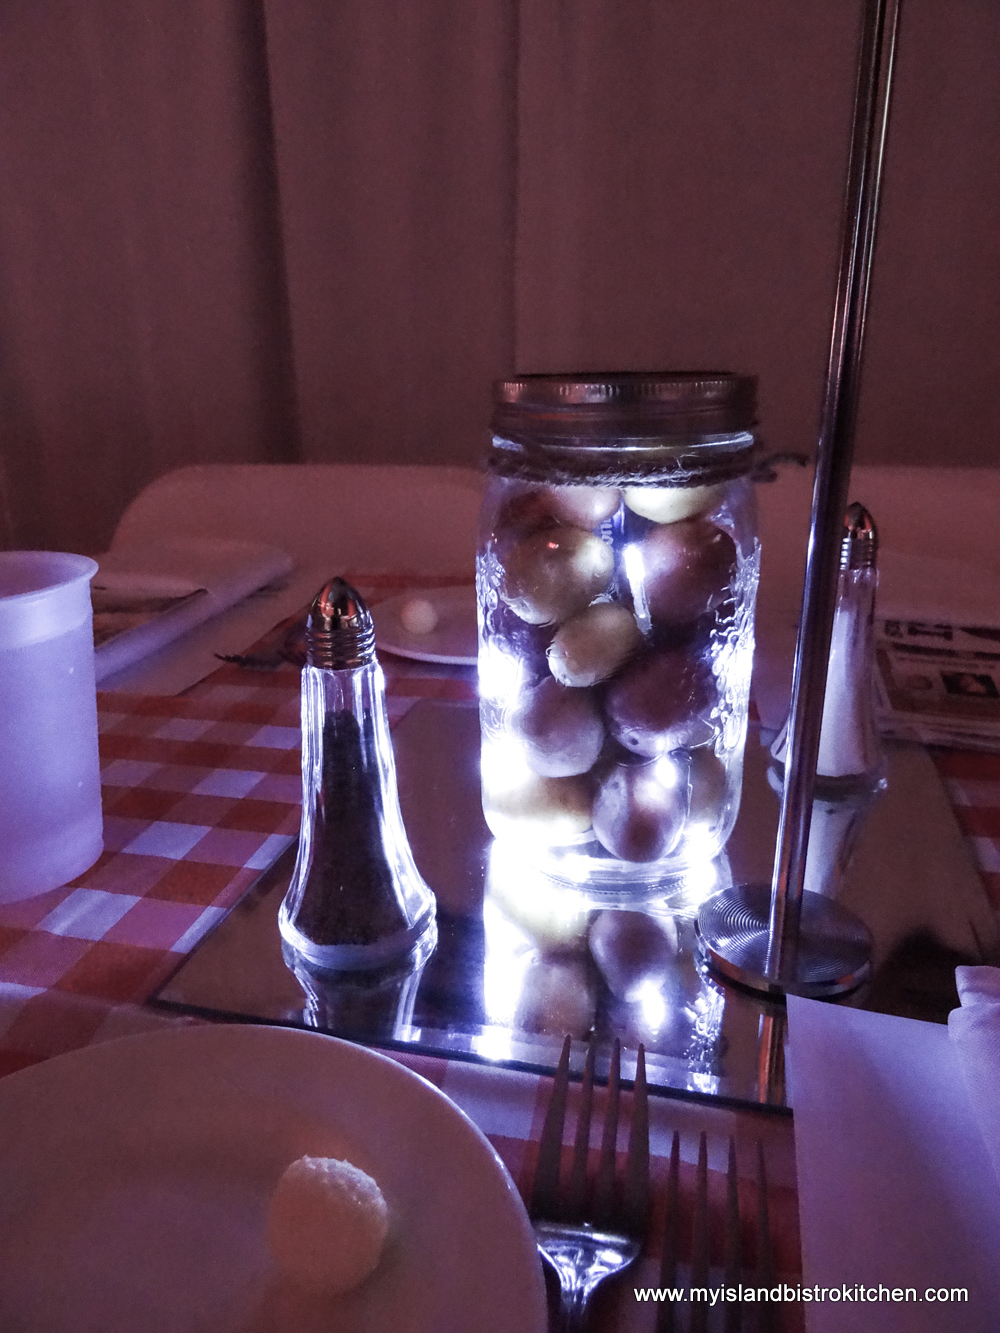 PEI Baby Potatoes Light up the Tables